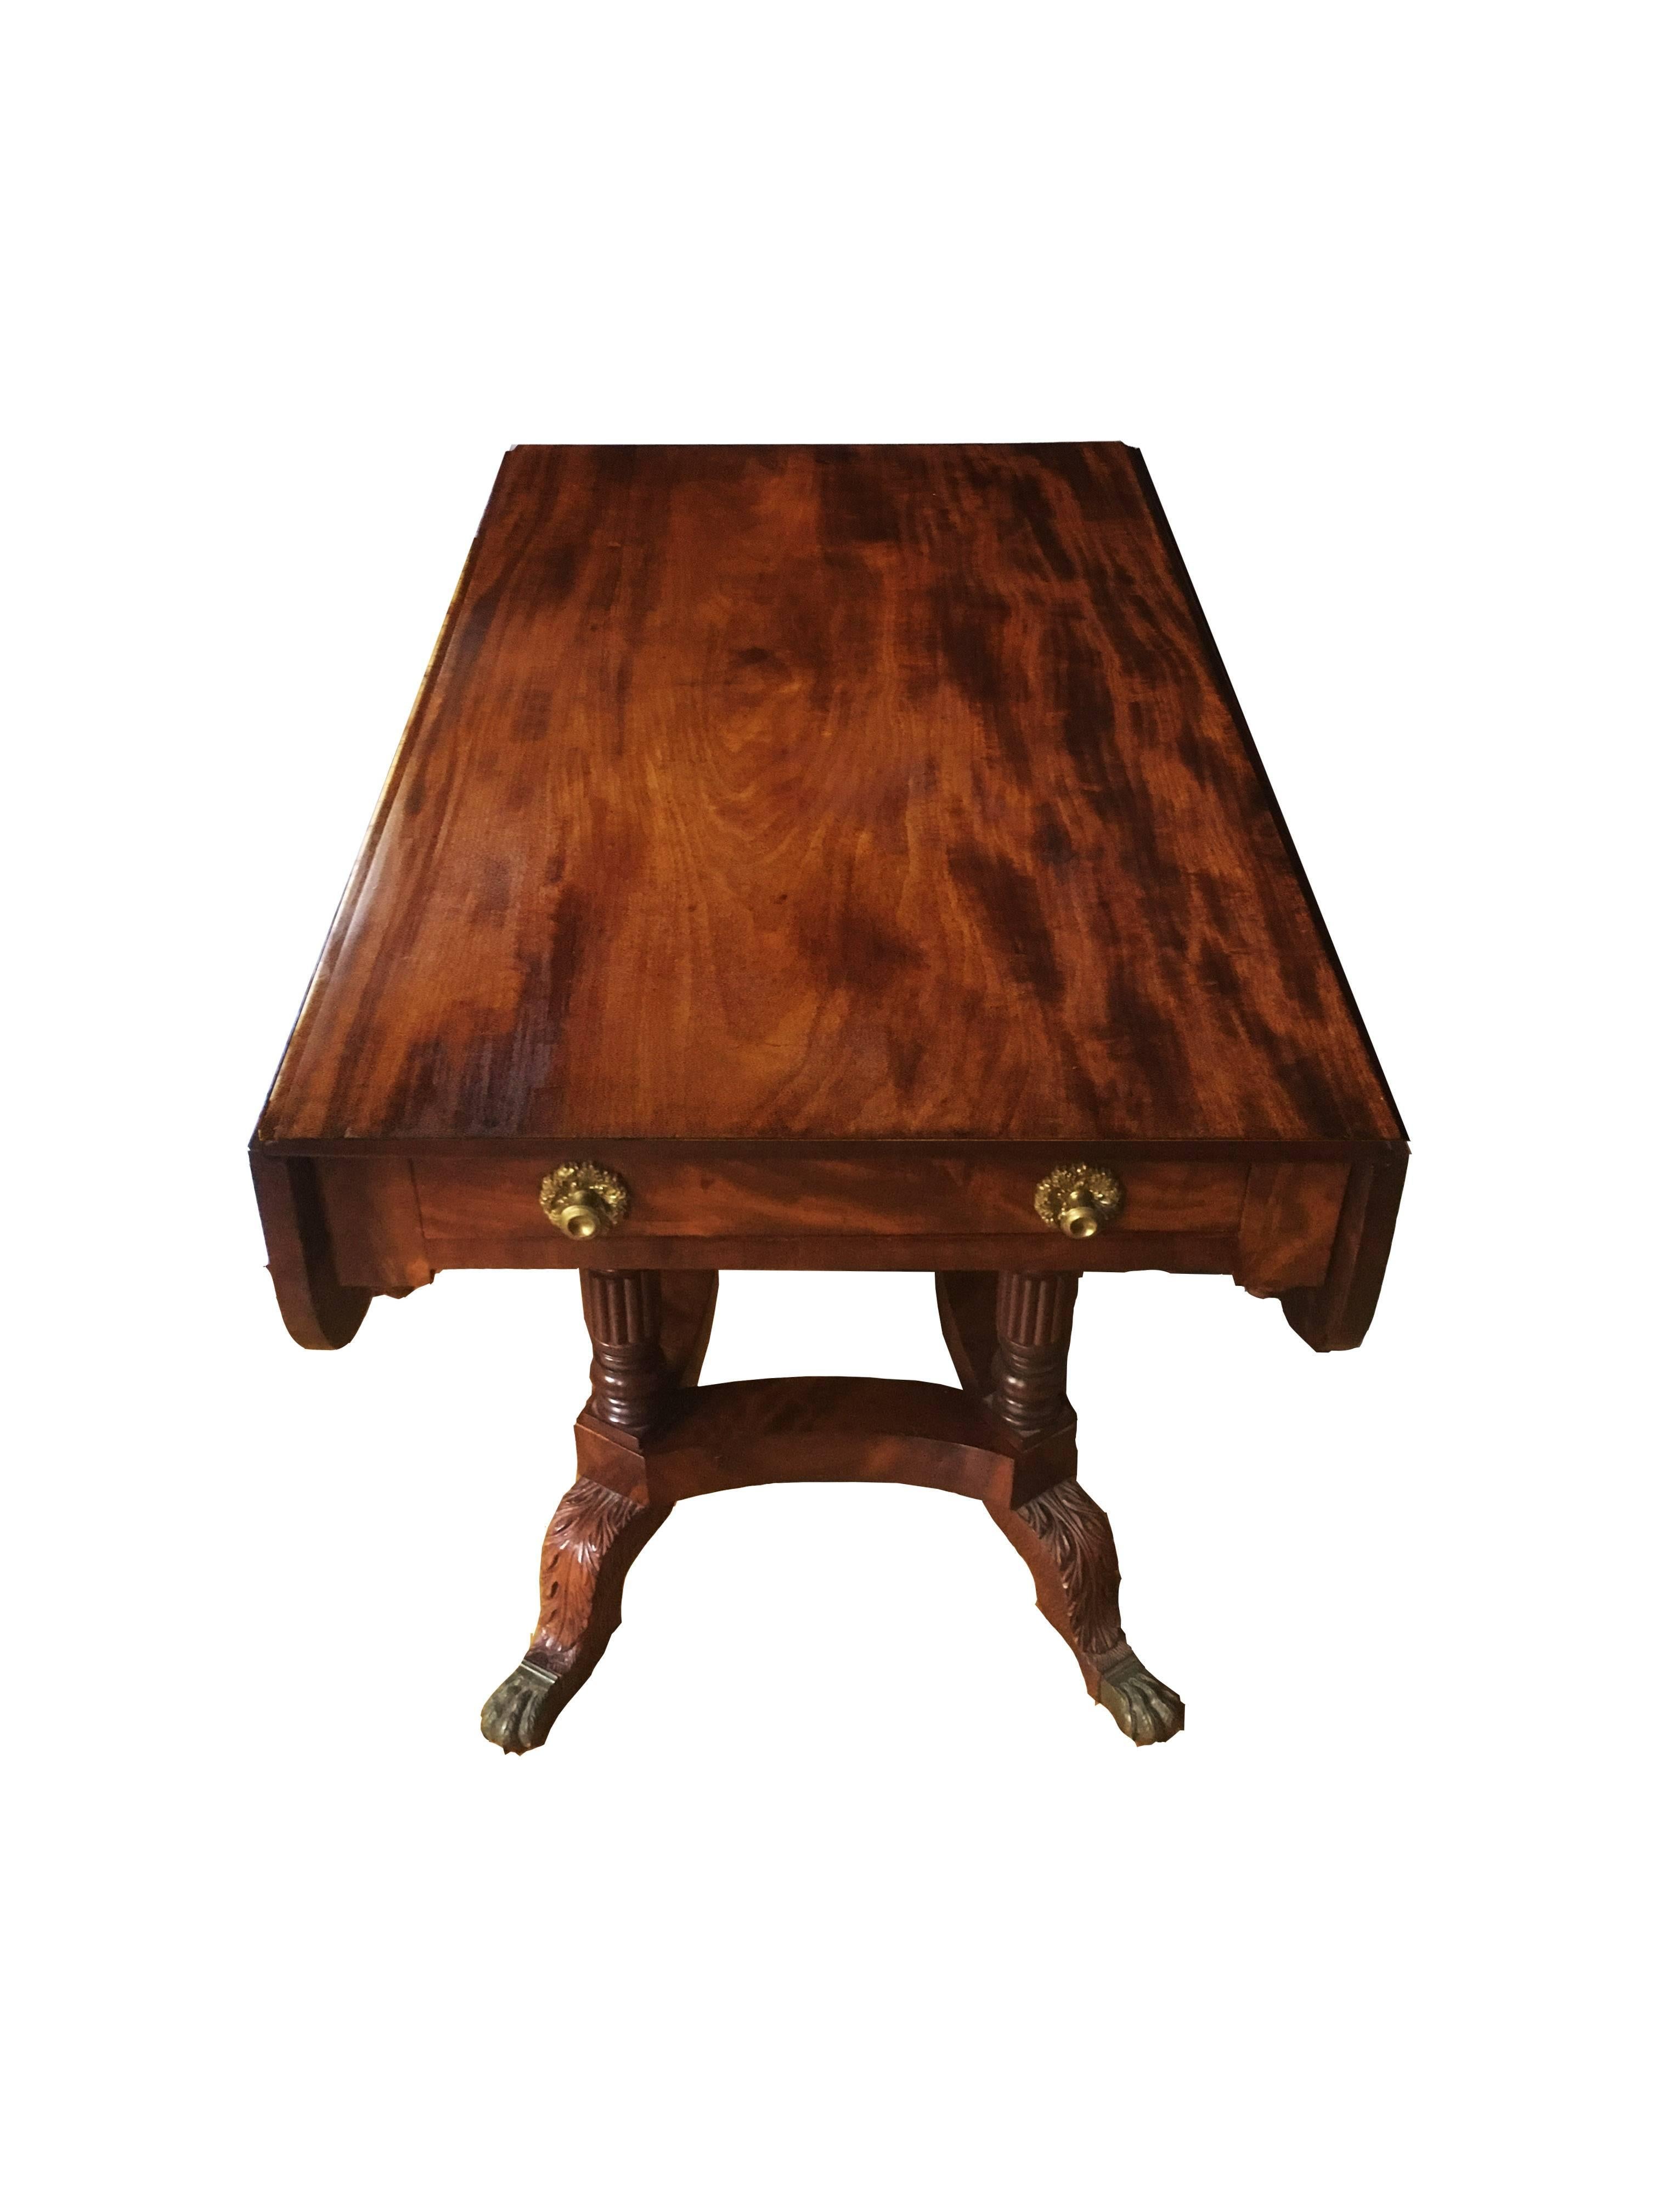 An exceptional New York breakfast table composed of the finest rib boned mahogany and masterful carving. The Pembroke table has one drawer with original brass ormolu pulls and a matching flare drawer opposite. The scalloped edged top is supported by